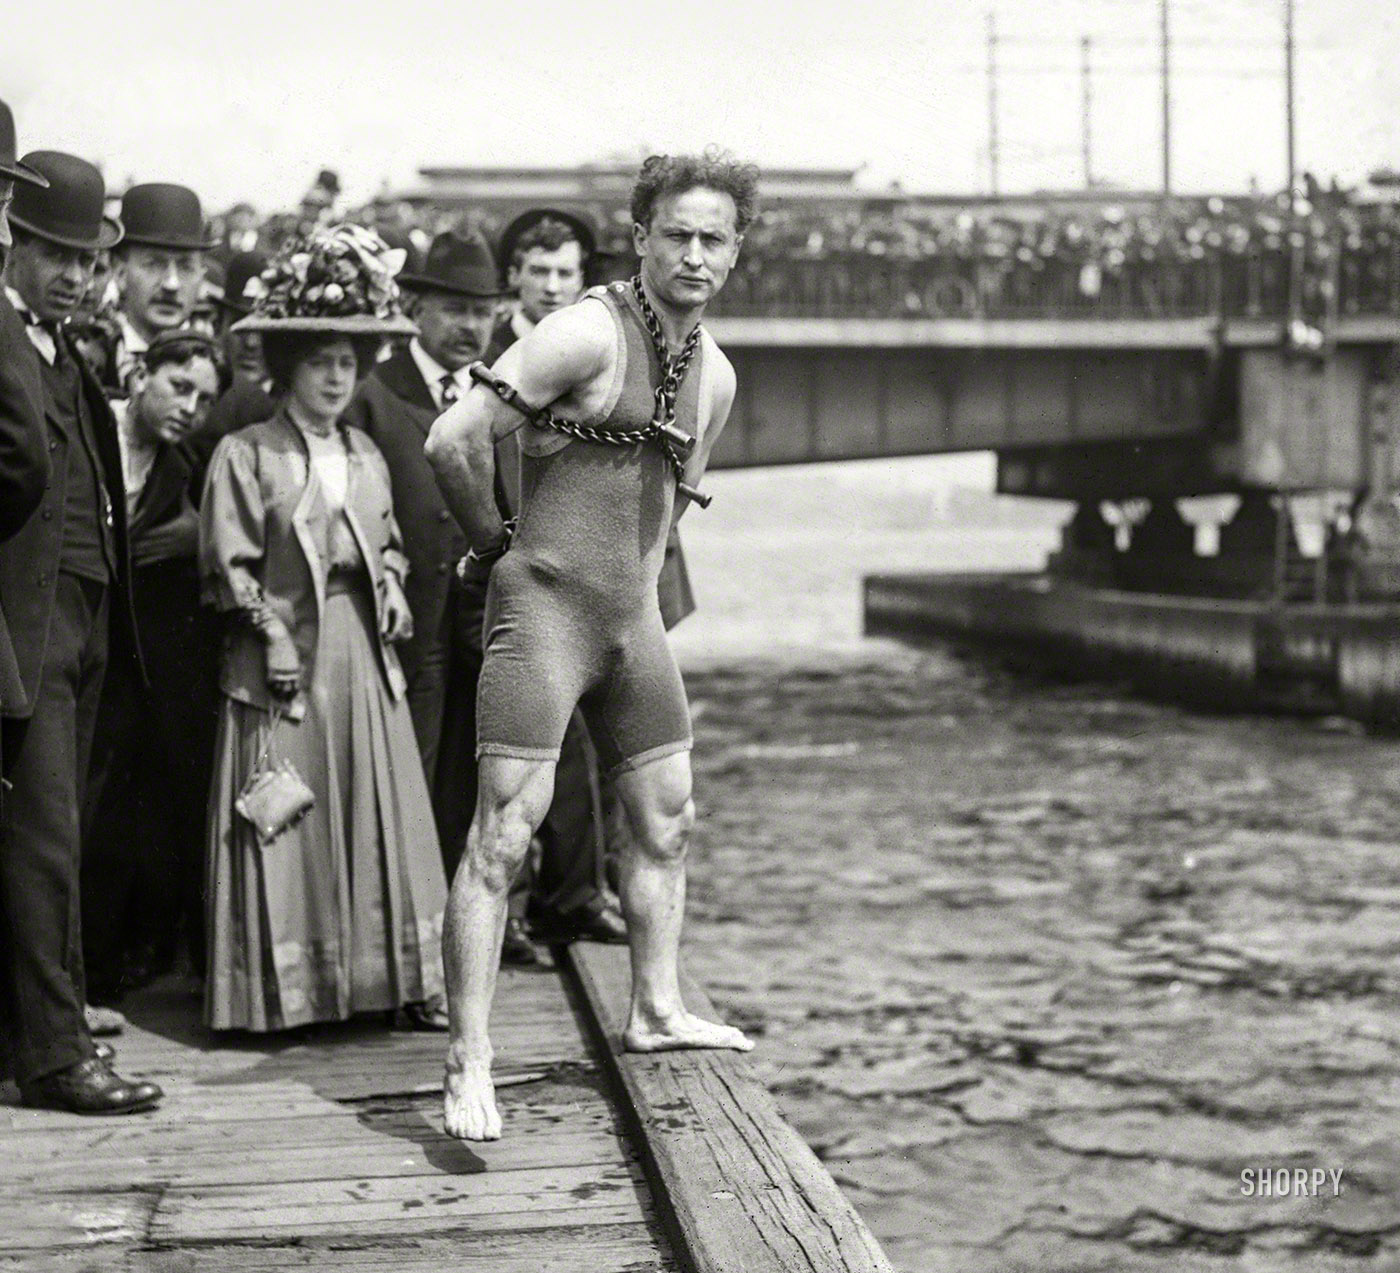 April 30, 1908. The Charles River in Boston. "Houdini in chains and handcuffs before jumping from Harvard Bridge." Photo by John Thurston. View full size.